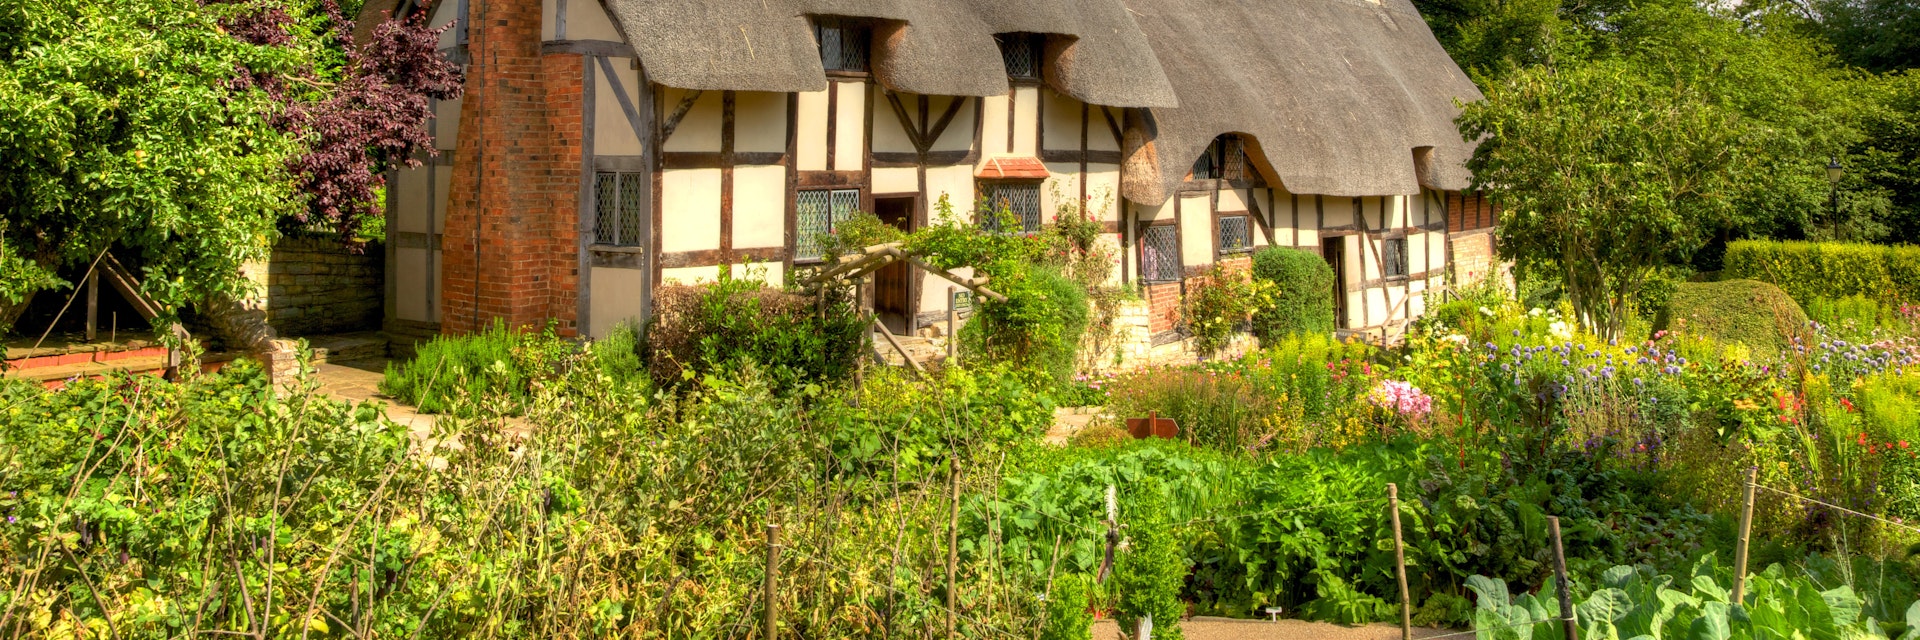 Anne Hathaway's (William Shakespeare's wife) famous thatched cottage and garden at Shottery, just outside Stratford upon Avon, England.